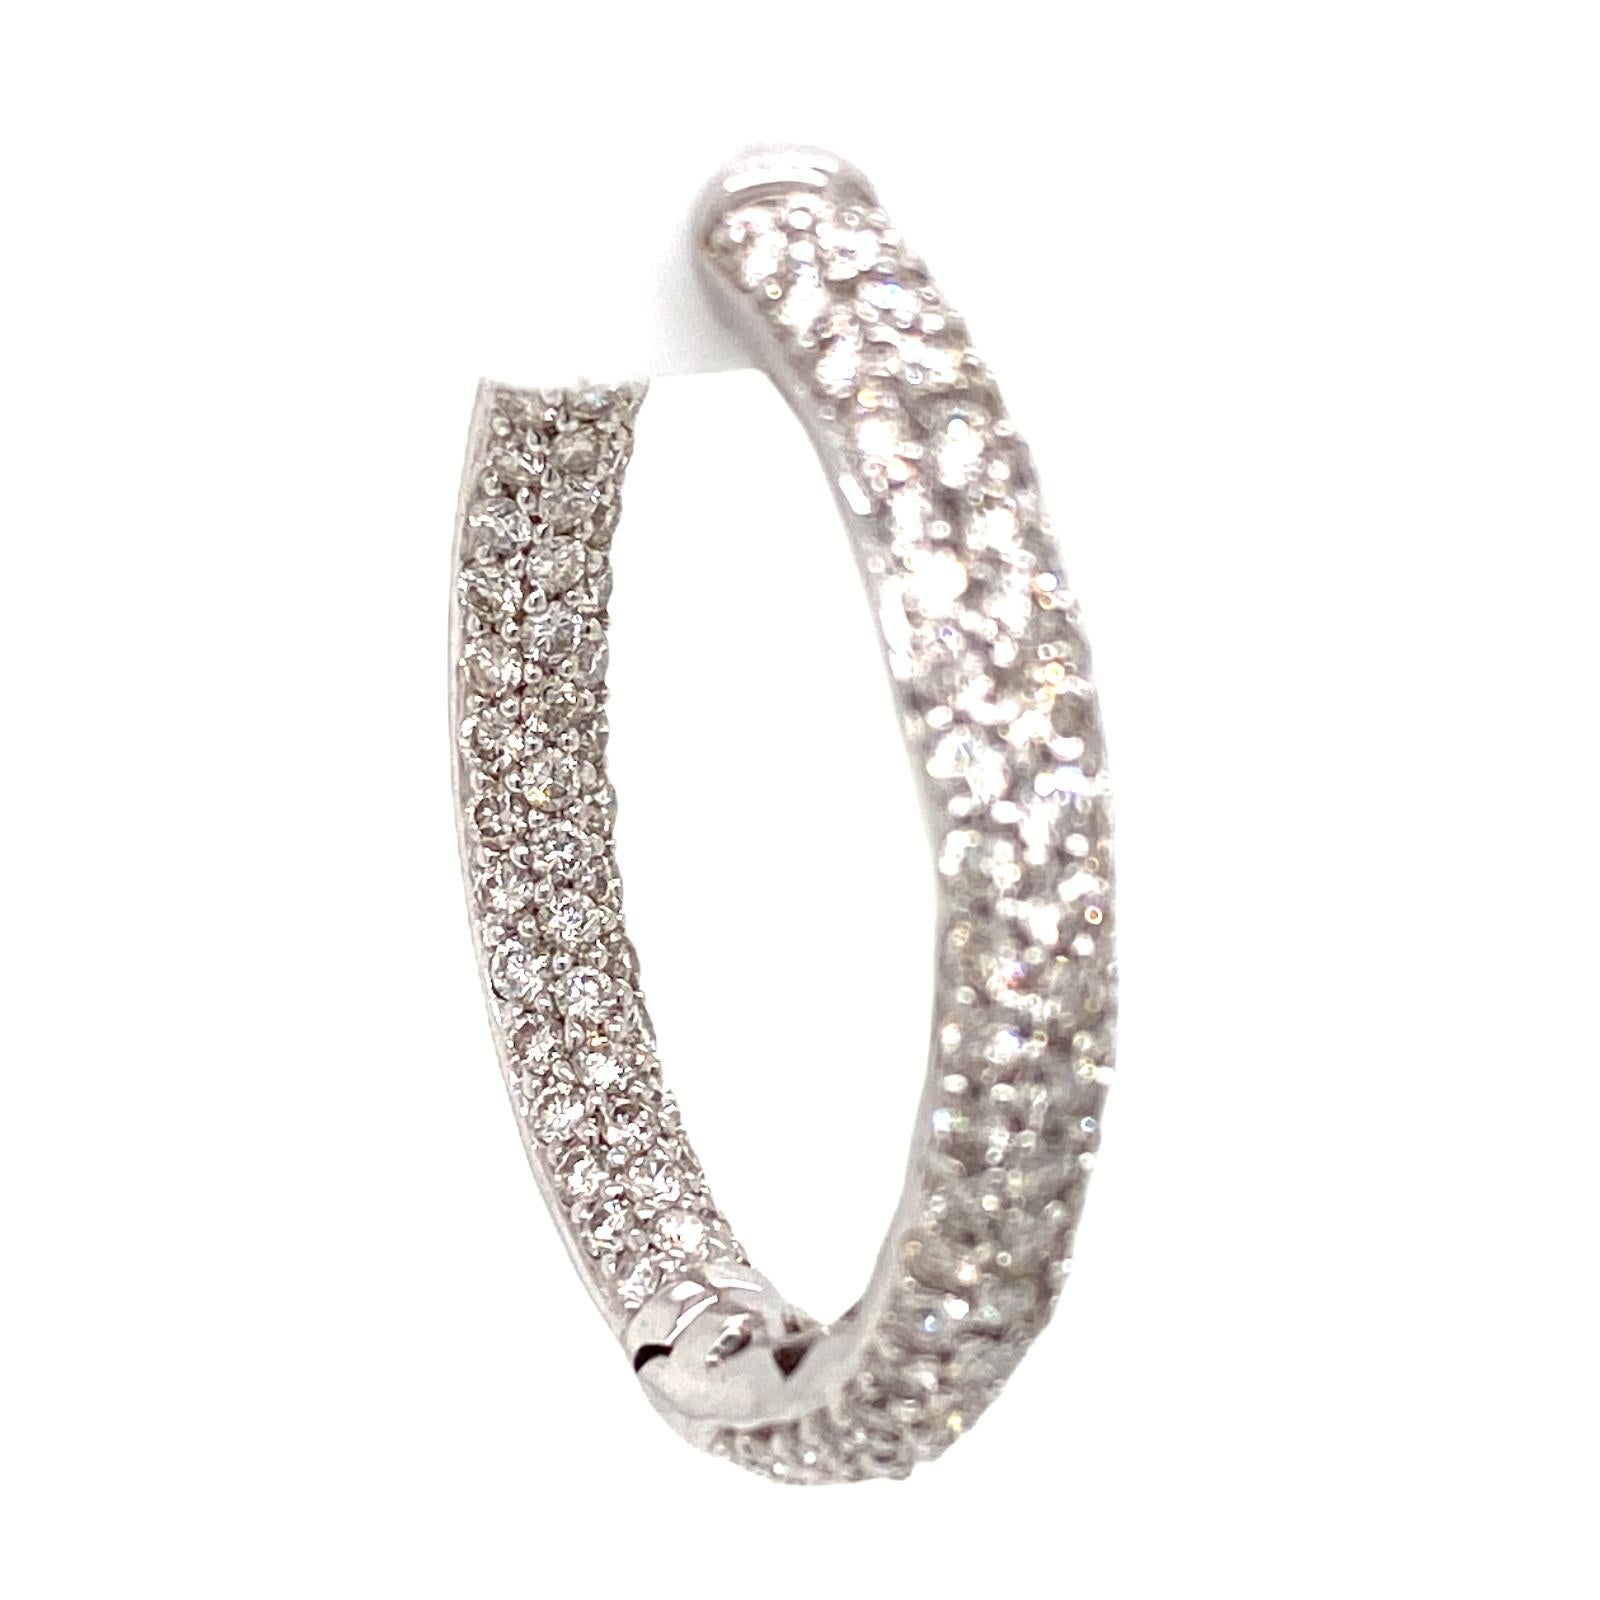 Round Cut 5.00 CTW Diamond Pave Hoop In and Out 18 Karat White Gold Earrings